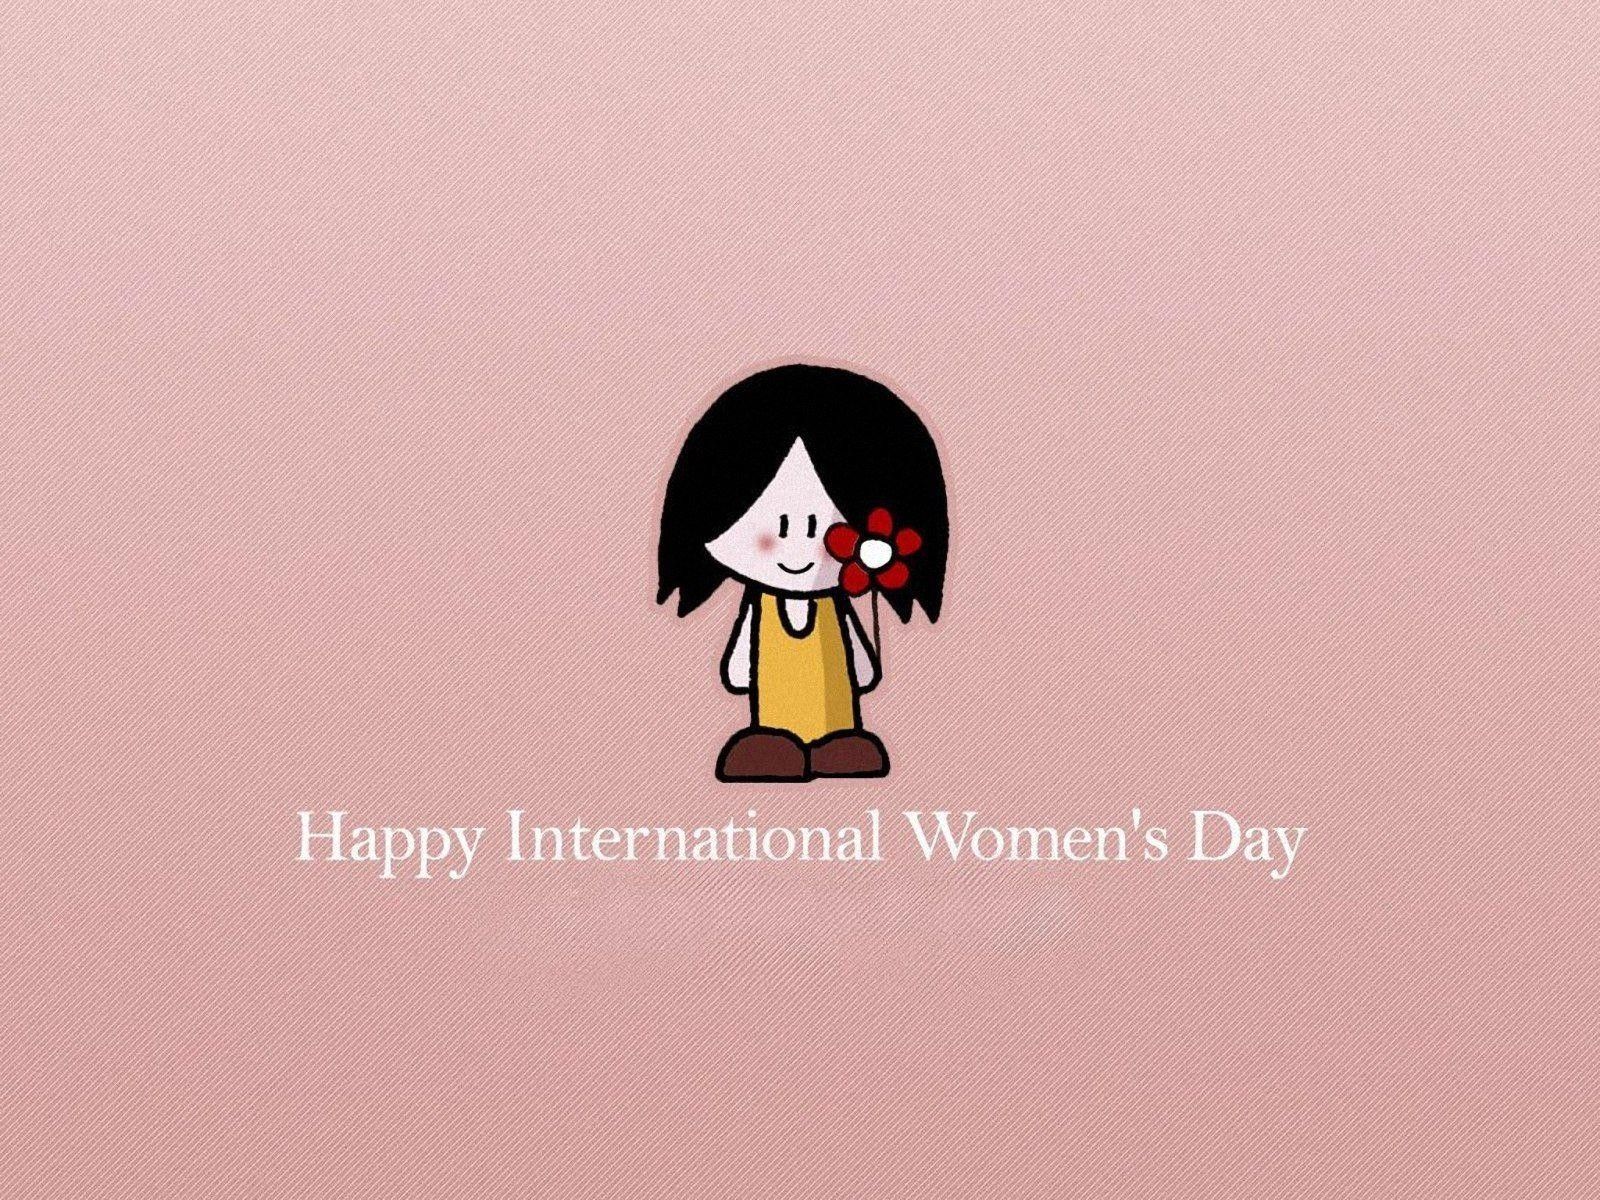 International Womens Day Image HD Download Free Amazing Women's Day Cute Wallpaper & Background Download